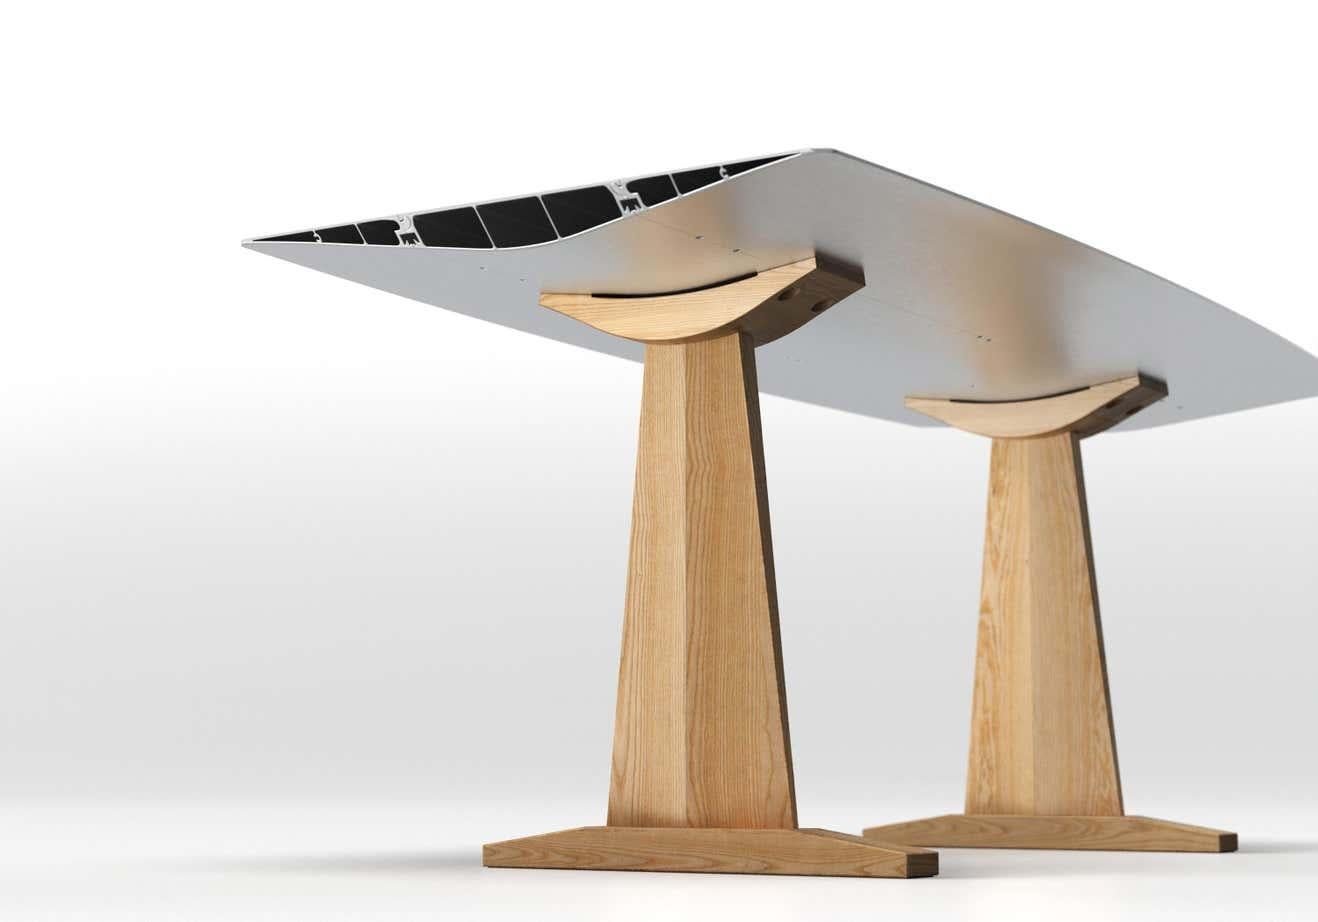 Dinning Table B90cm Anodized Silver Top With Wood Trestle Legs

Materials: 
Aluminium, oak, ash
Dimensions: 
D 90 cm x W 240 cm x H 73 cm

The Table B, which inaugurated the Extrusions Collection in 2009, can reach up to five metres using a simple